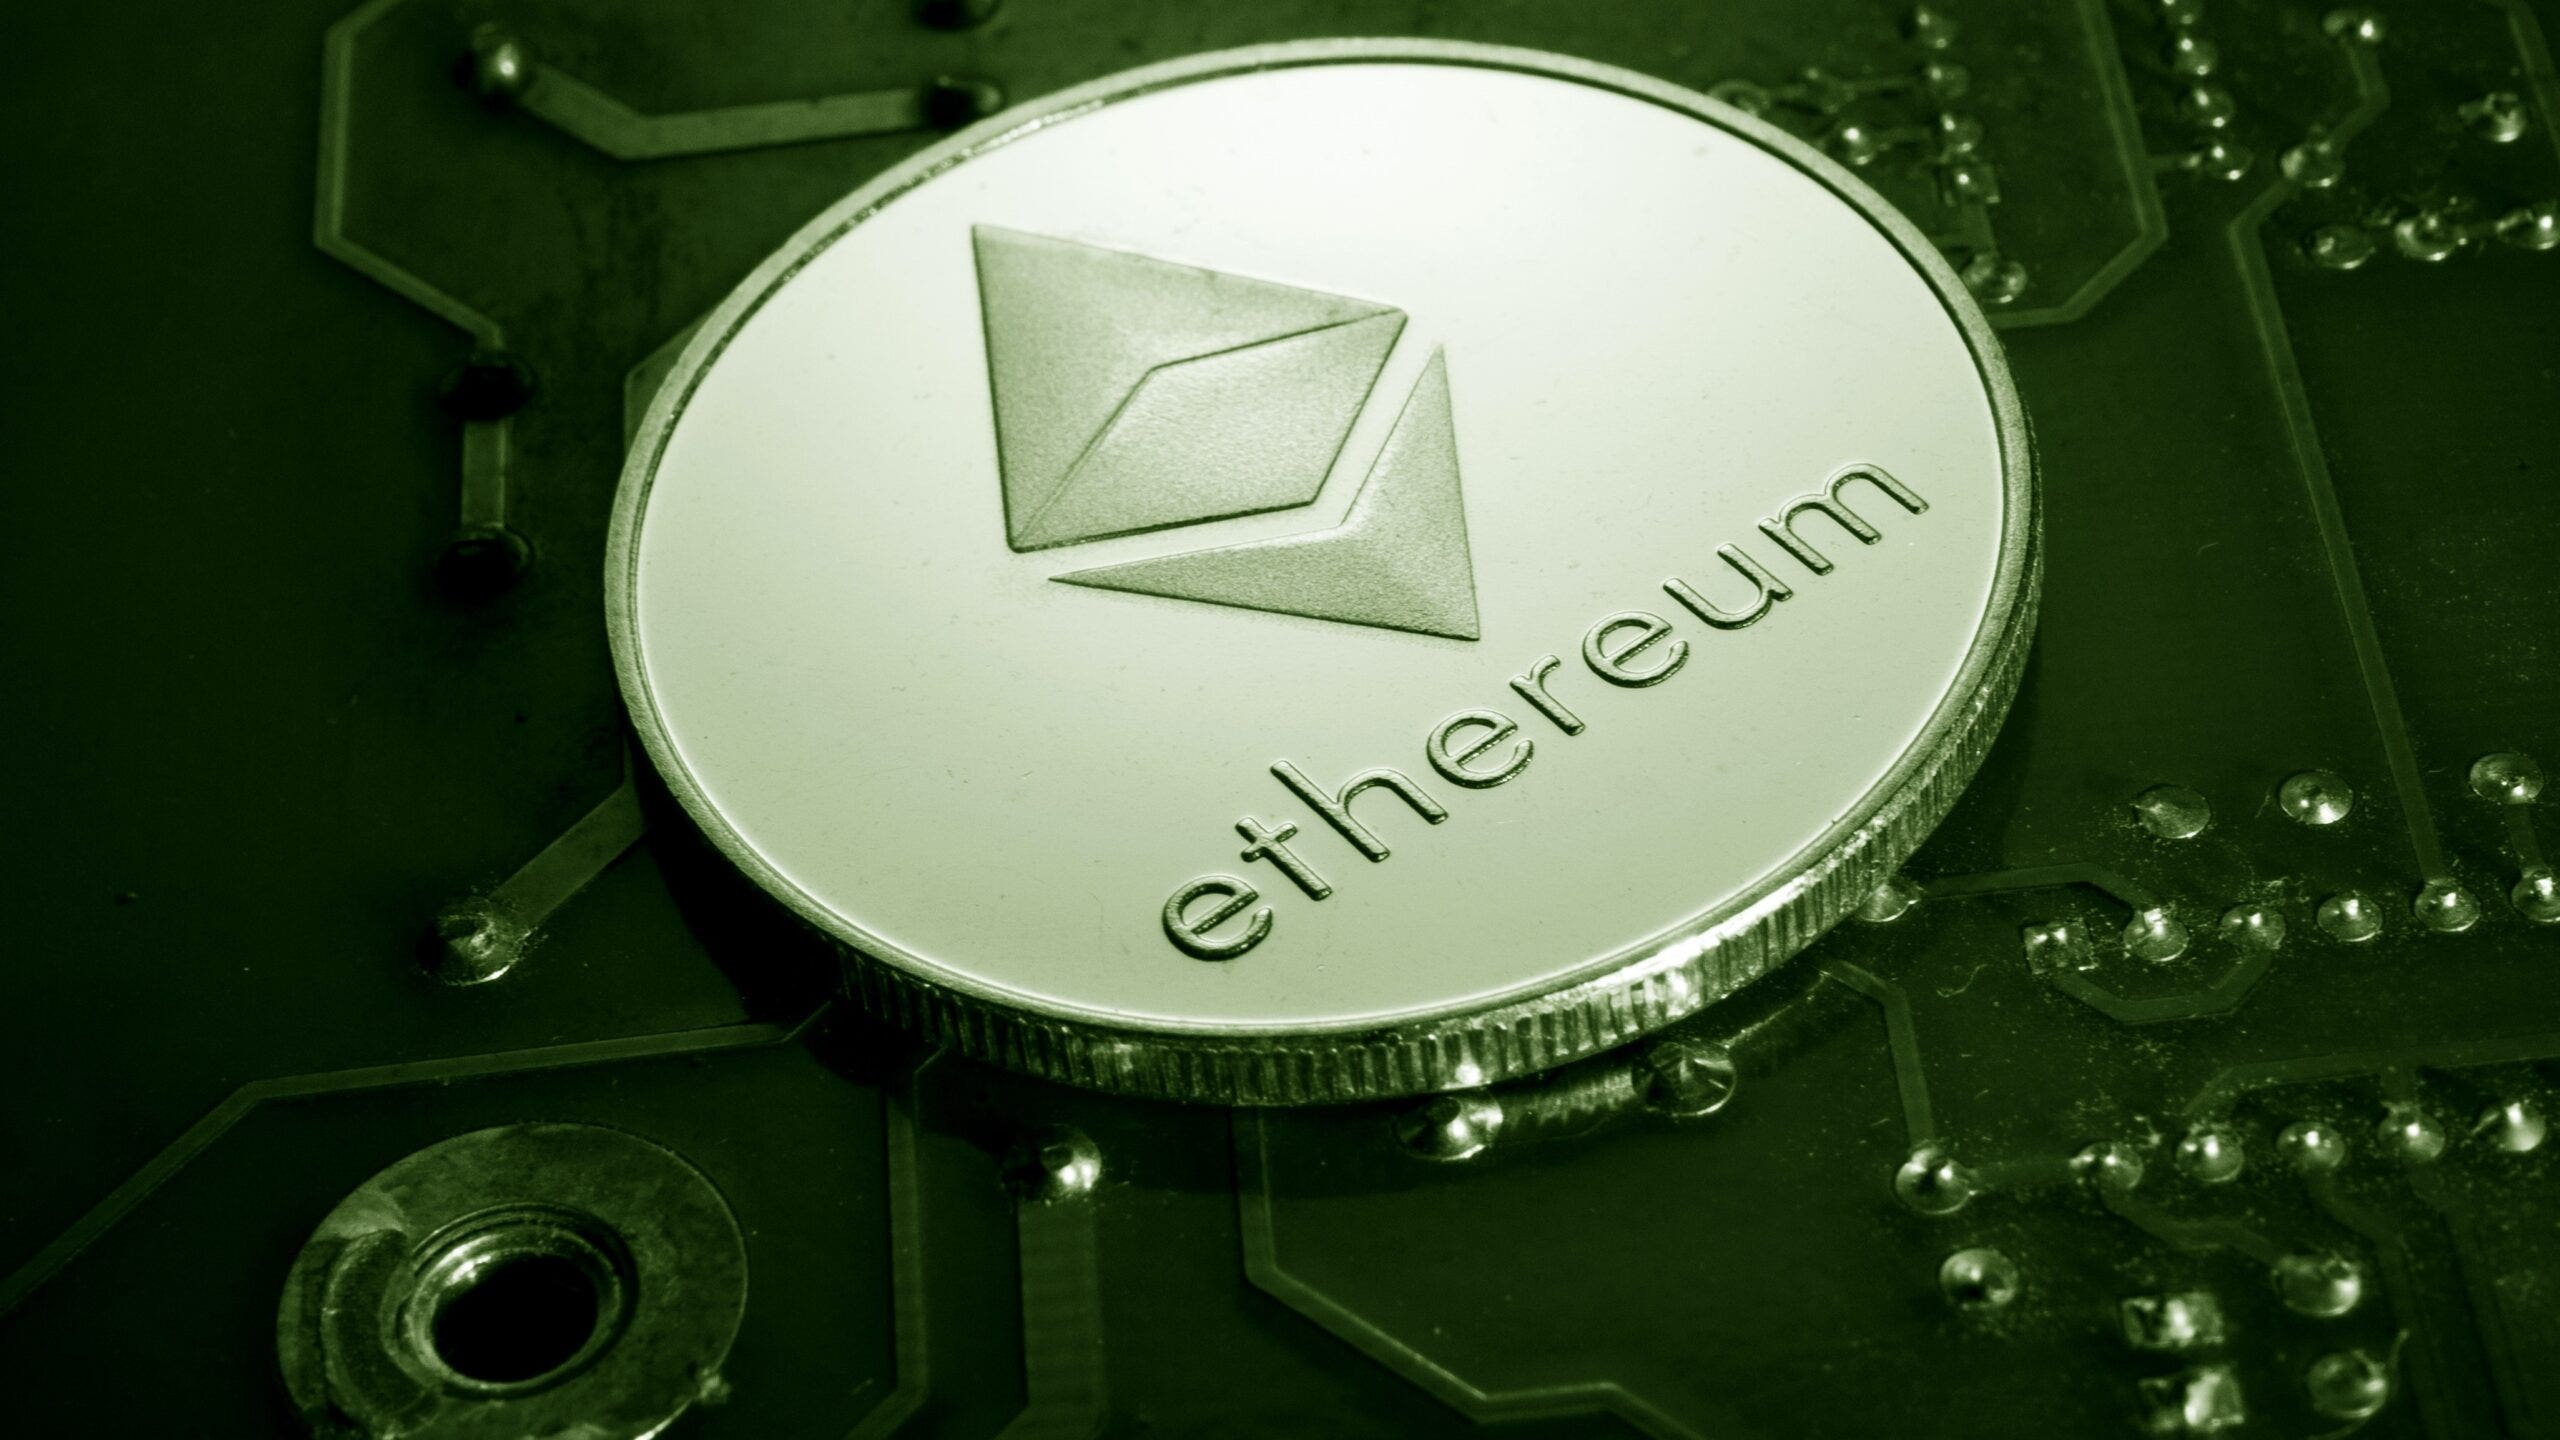 What Is Ether (ETH)? Definition, How It Works, Vs. Bitcoin